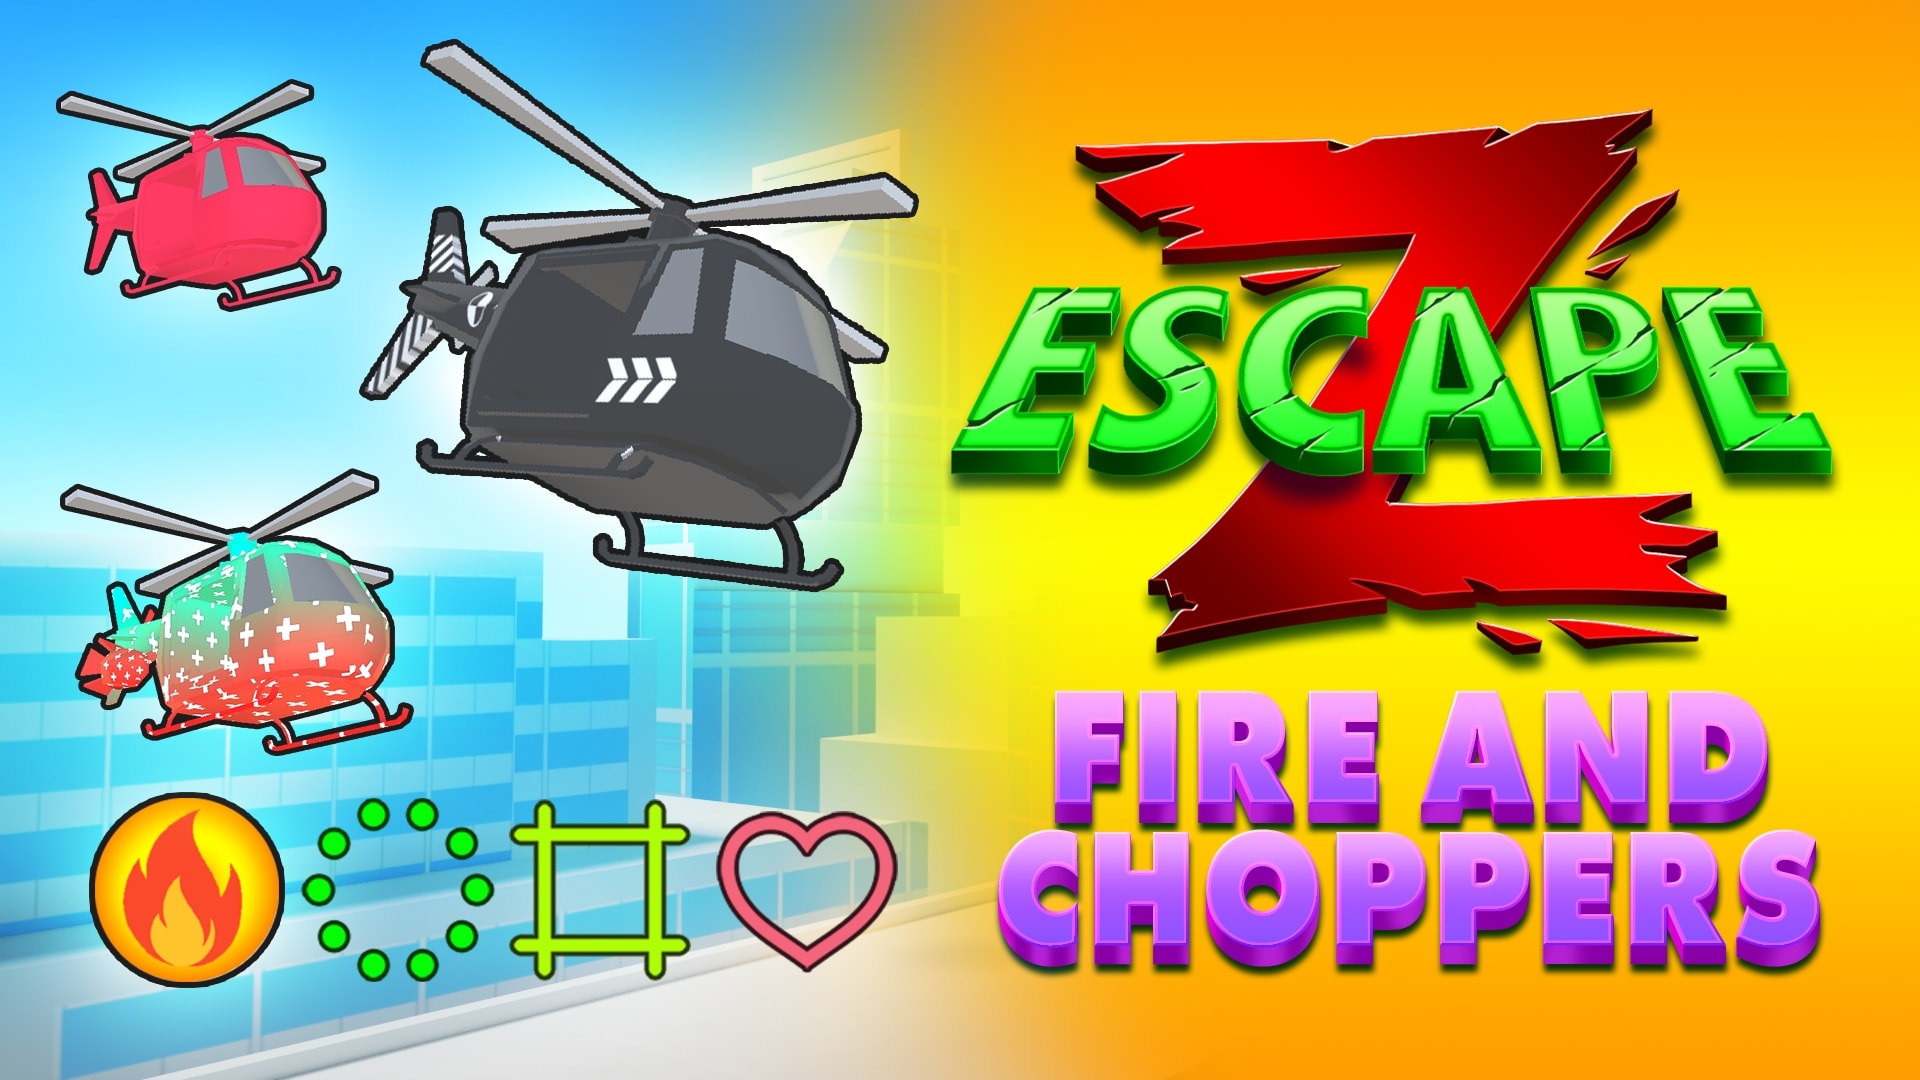 Z Escape: Fire and Choppers 1